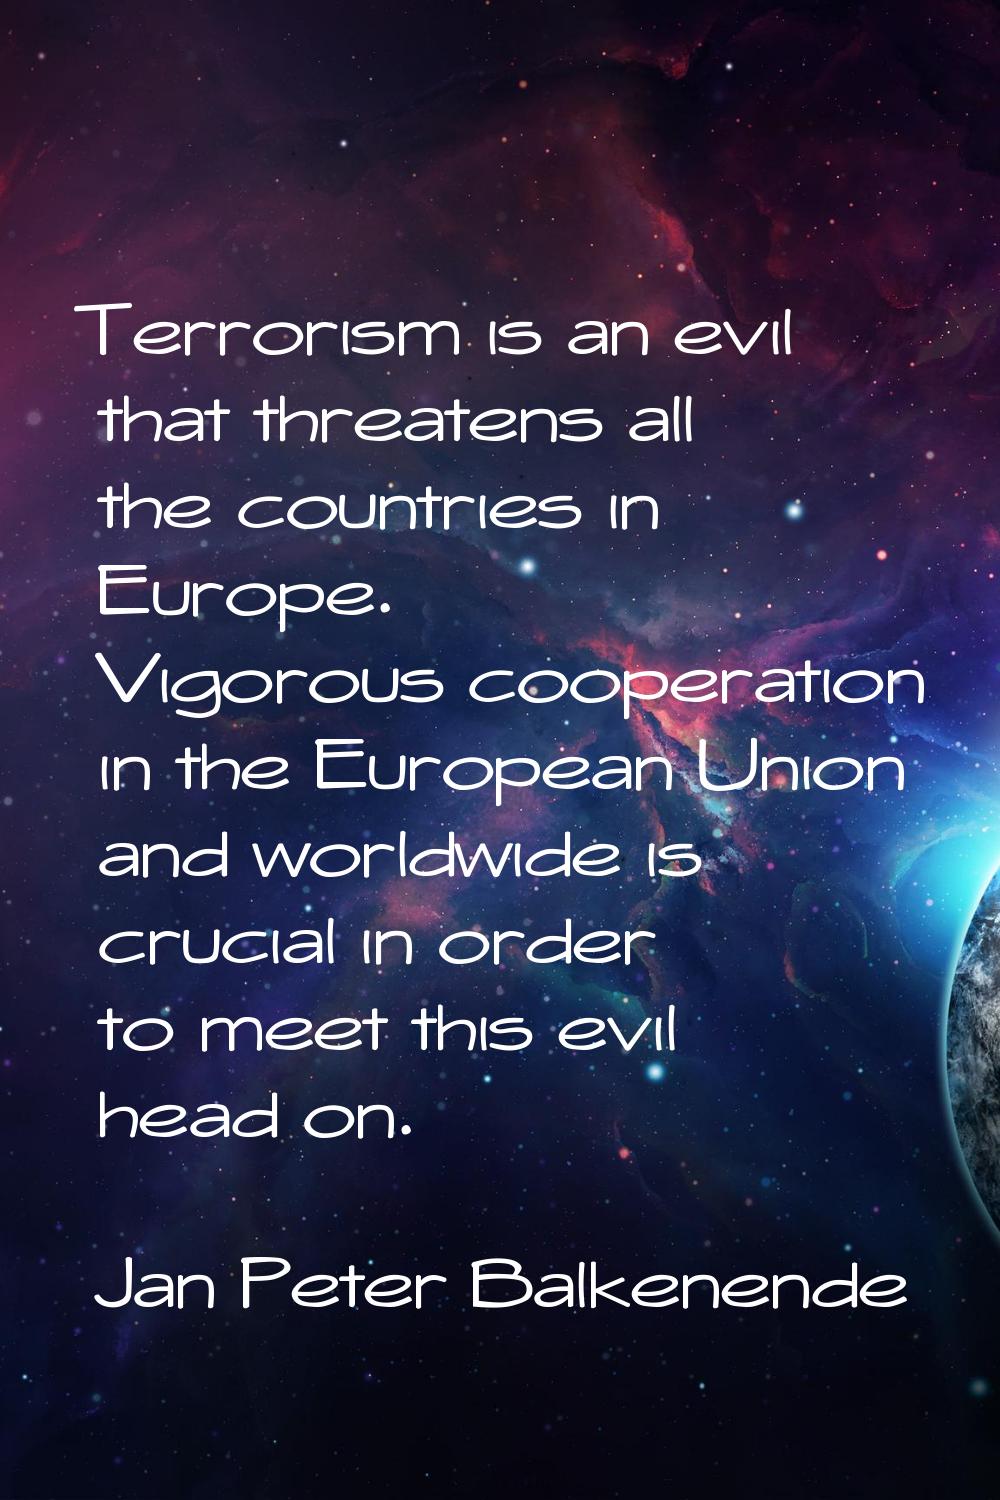 Terrorism is an evil that threatens all the countries in Europe. Vigorous cooperation in the Europe